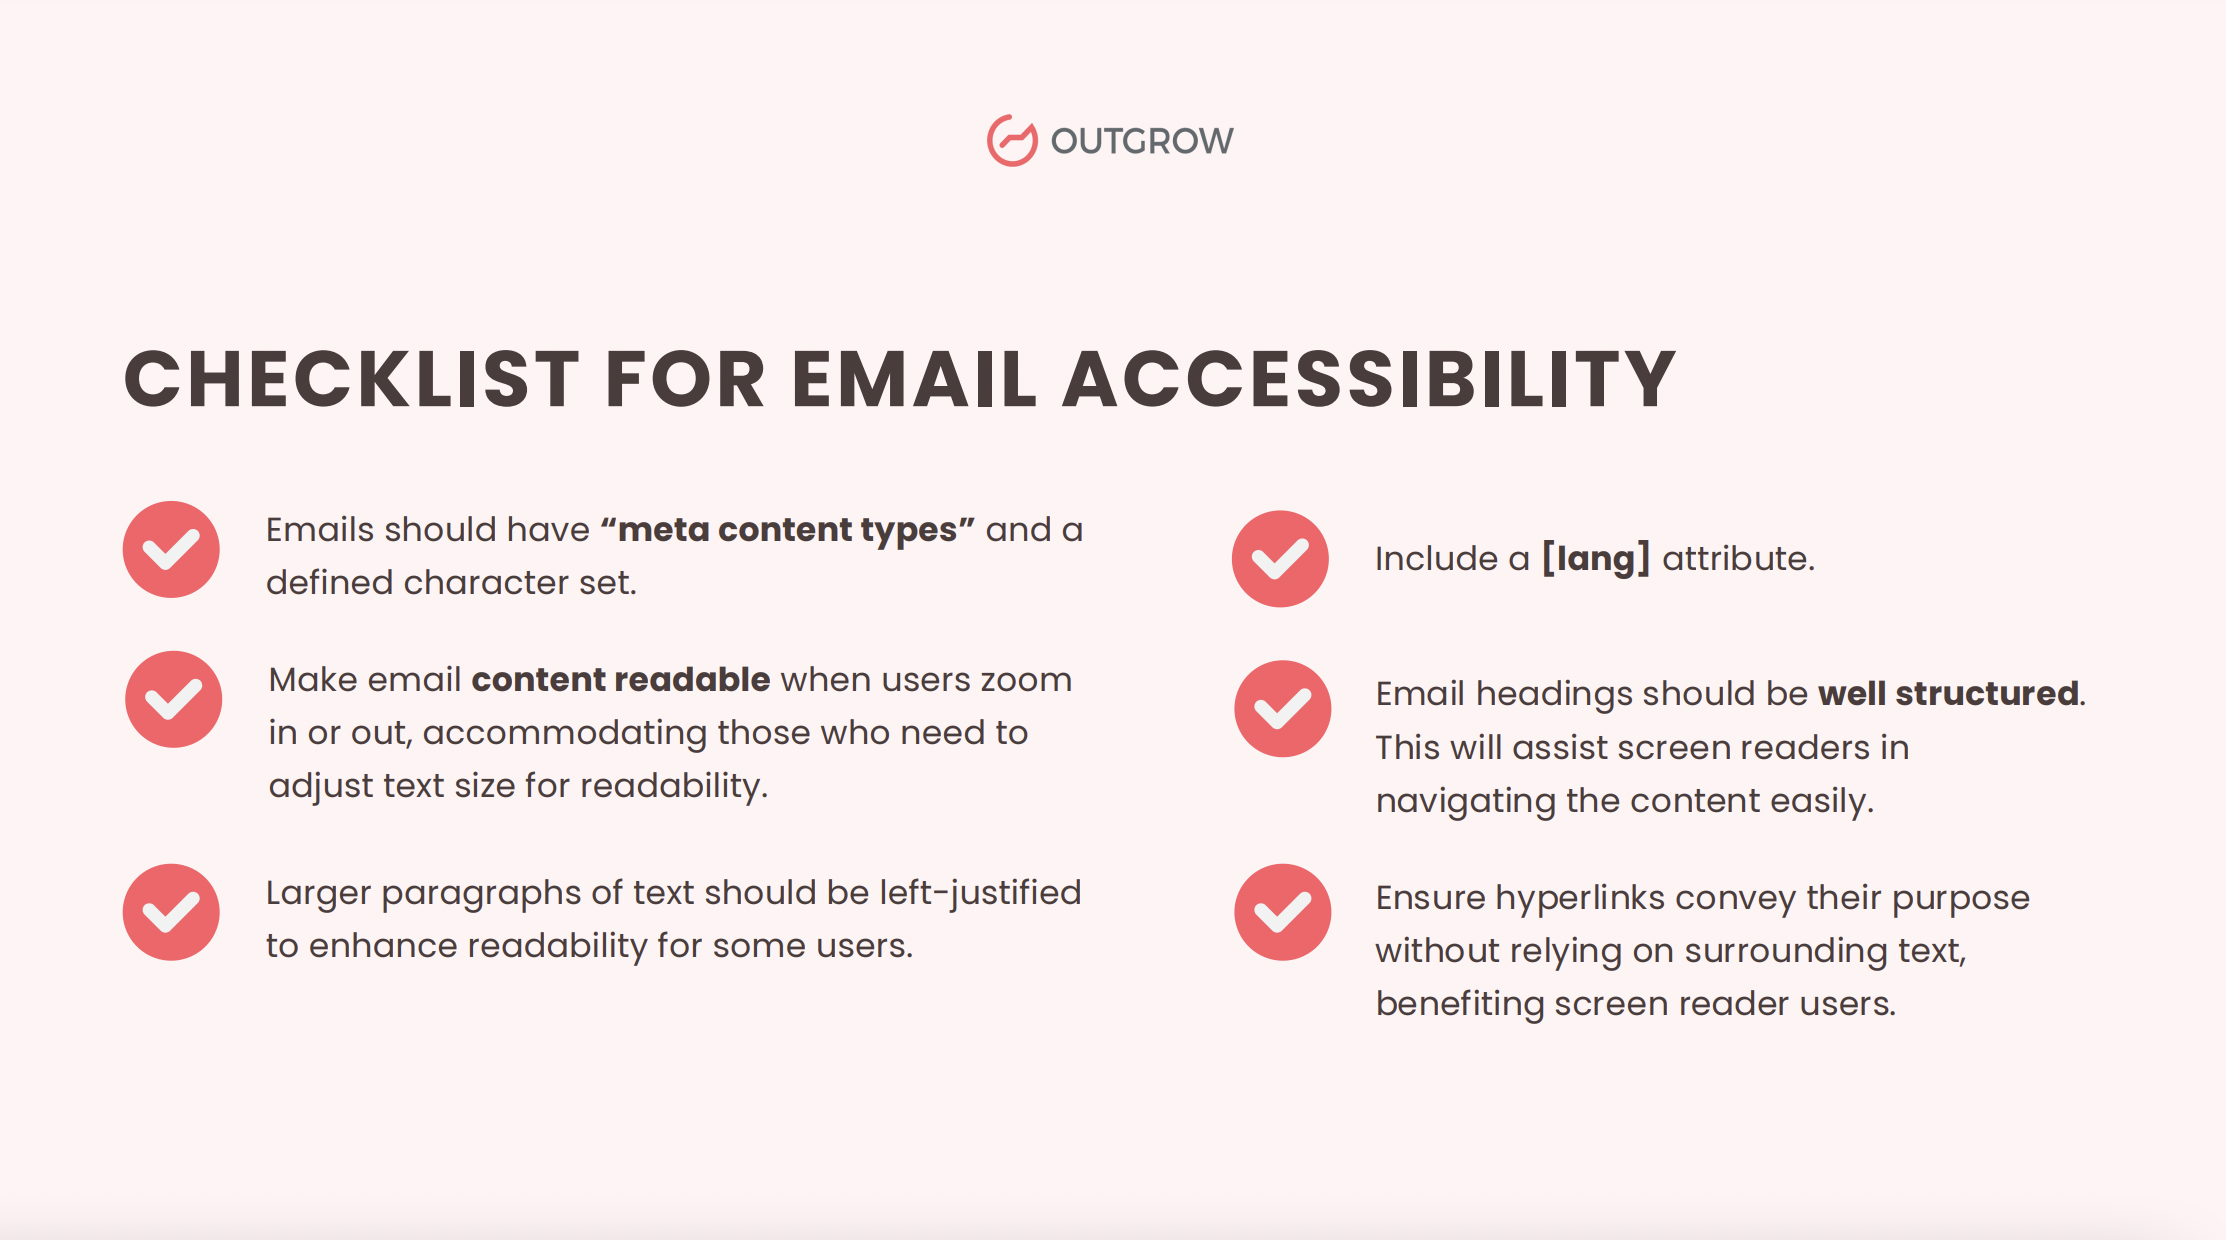 Checklist for email accessibility